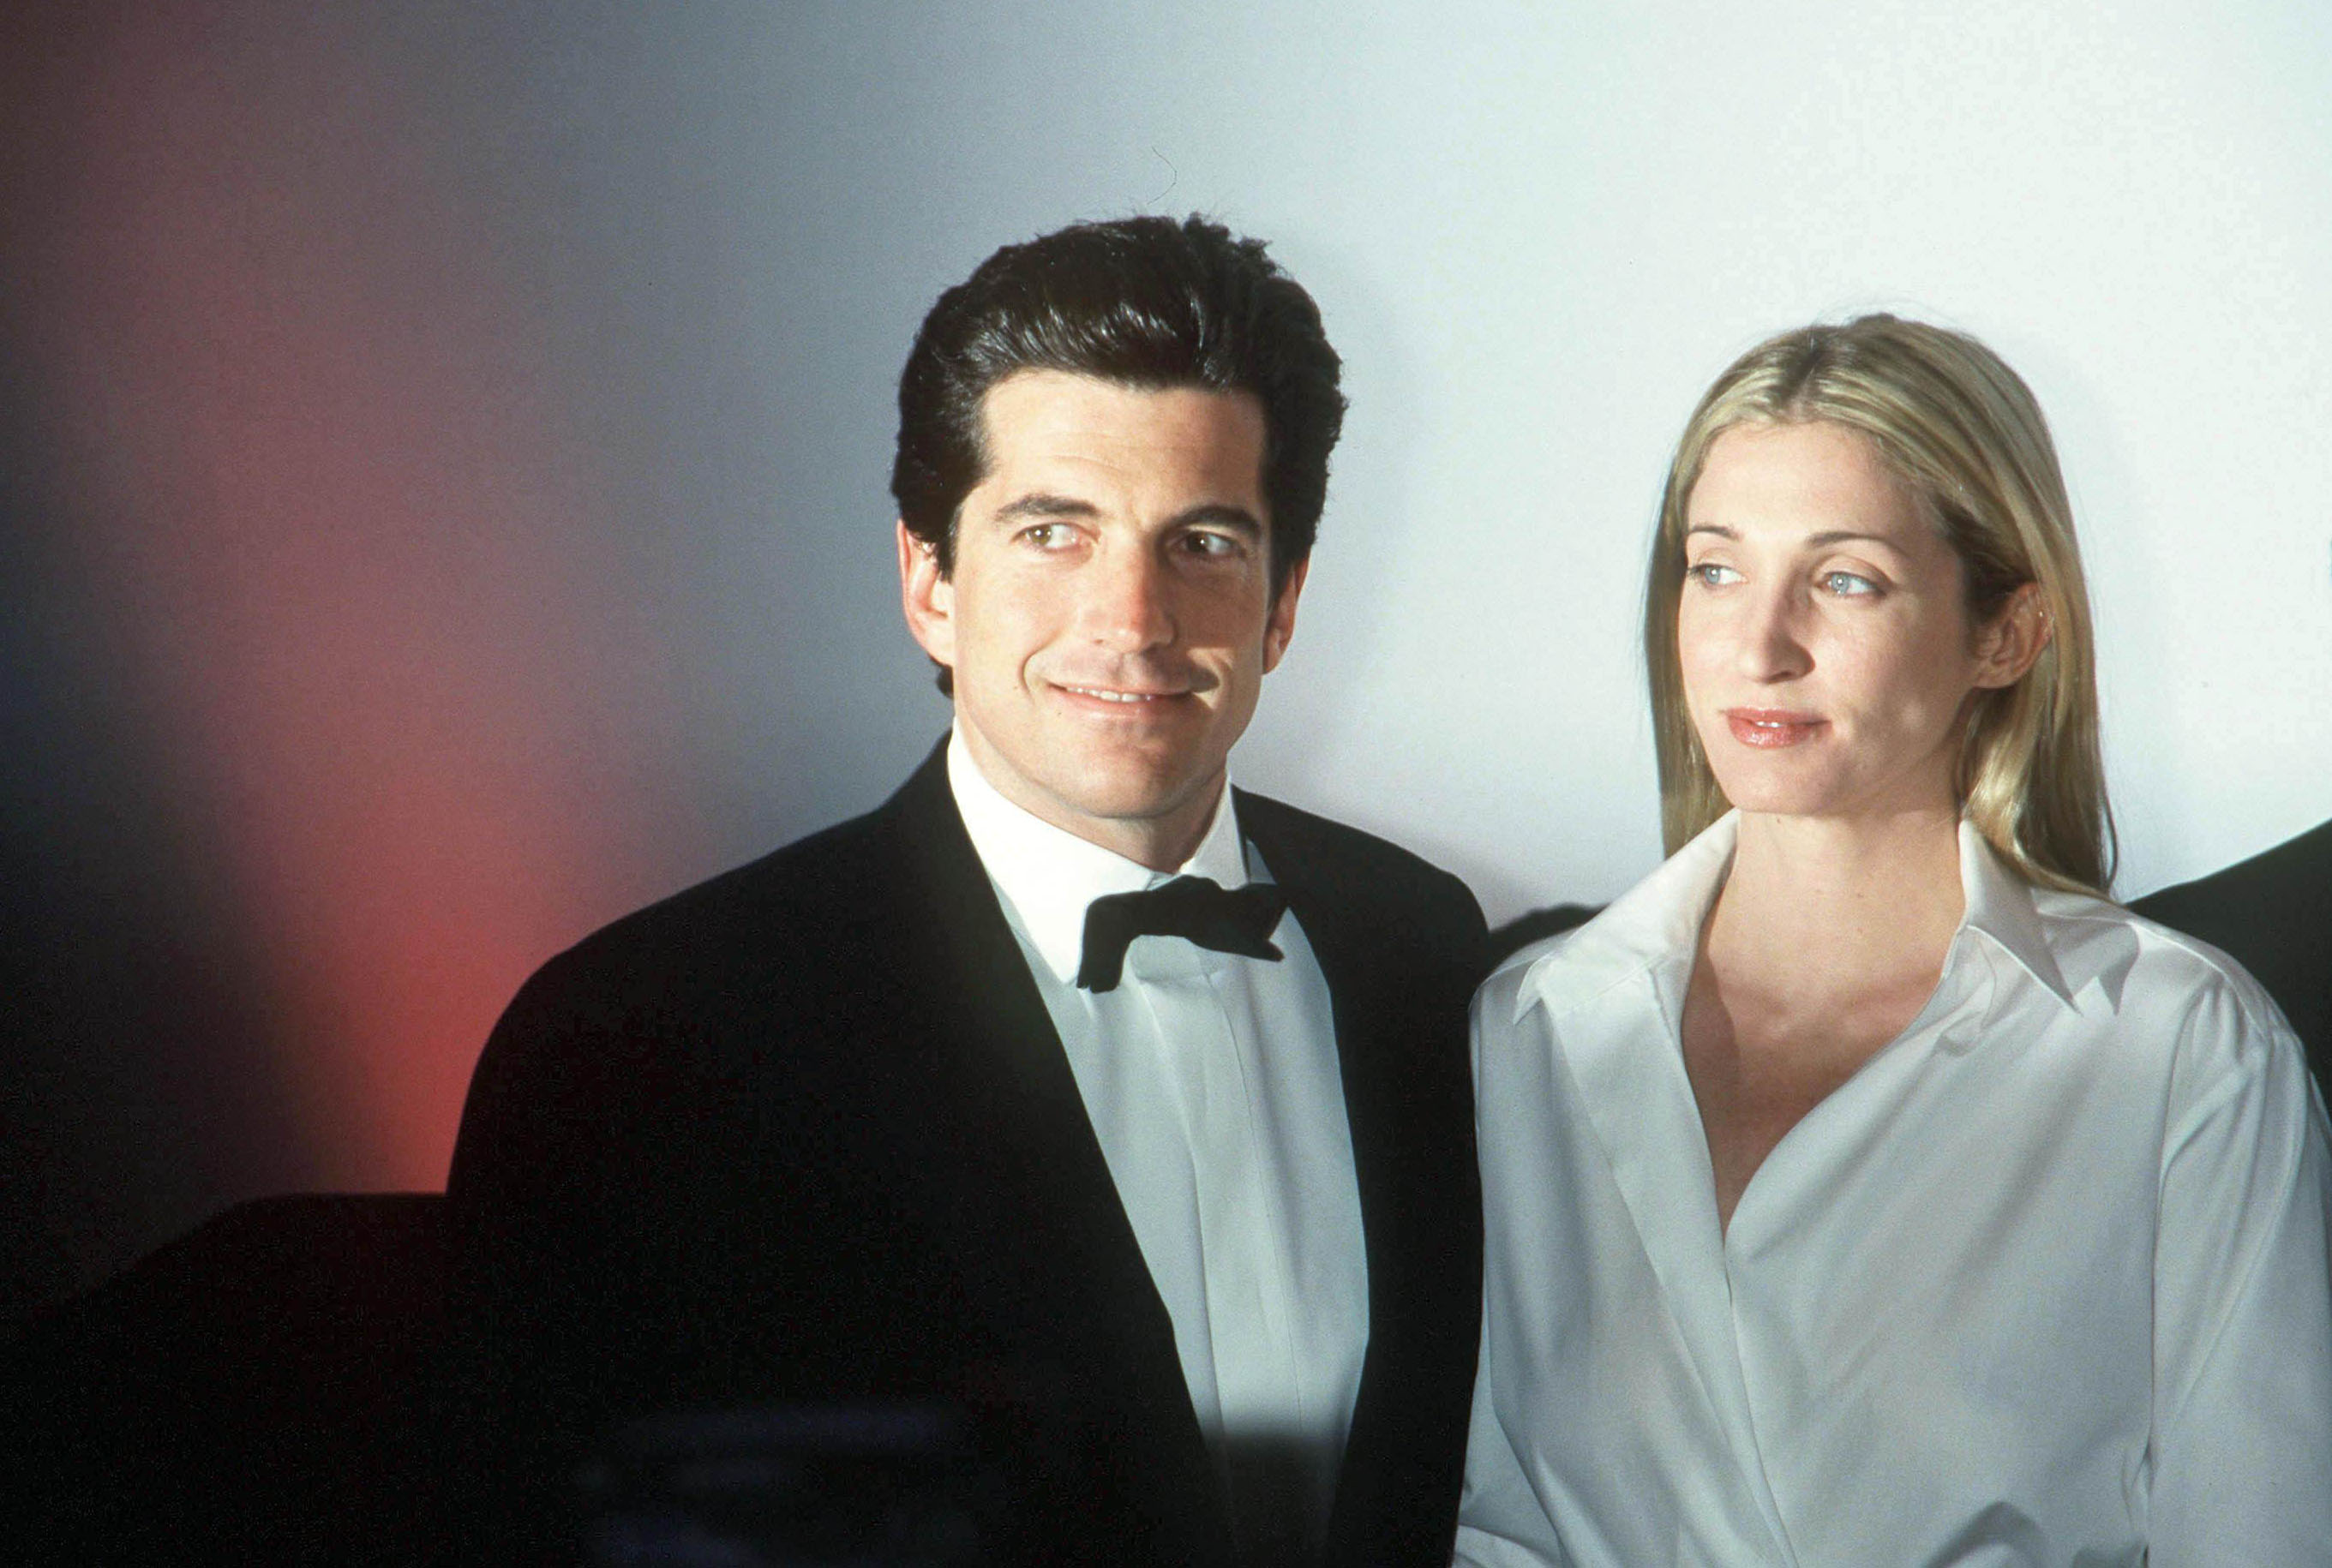 John F. Kennedy Jr. and his wife Carolyn Bessette Kennedy at the "Brite Nite Whitney" Fundraising Gala on March 9, 1999 at the Whitney Museum of American Art in New York City | Source: Getty Images